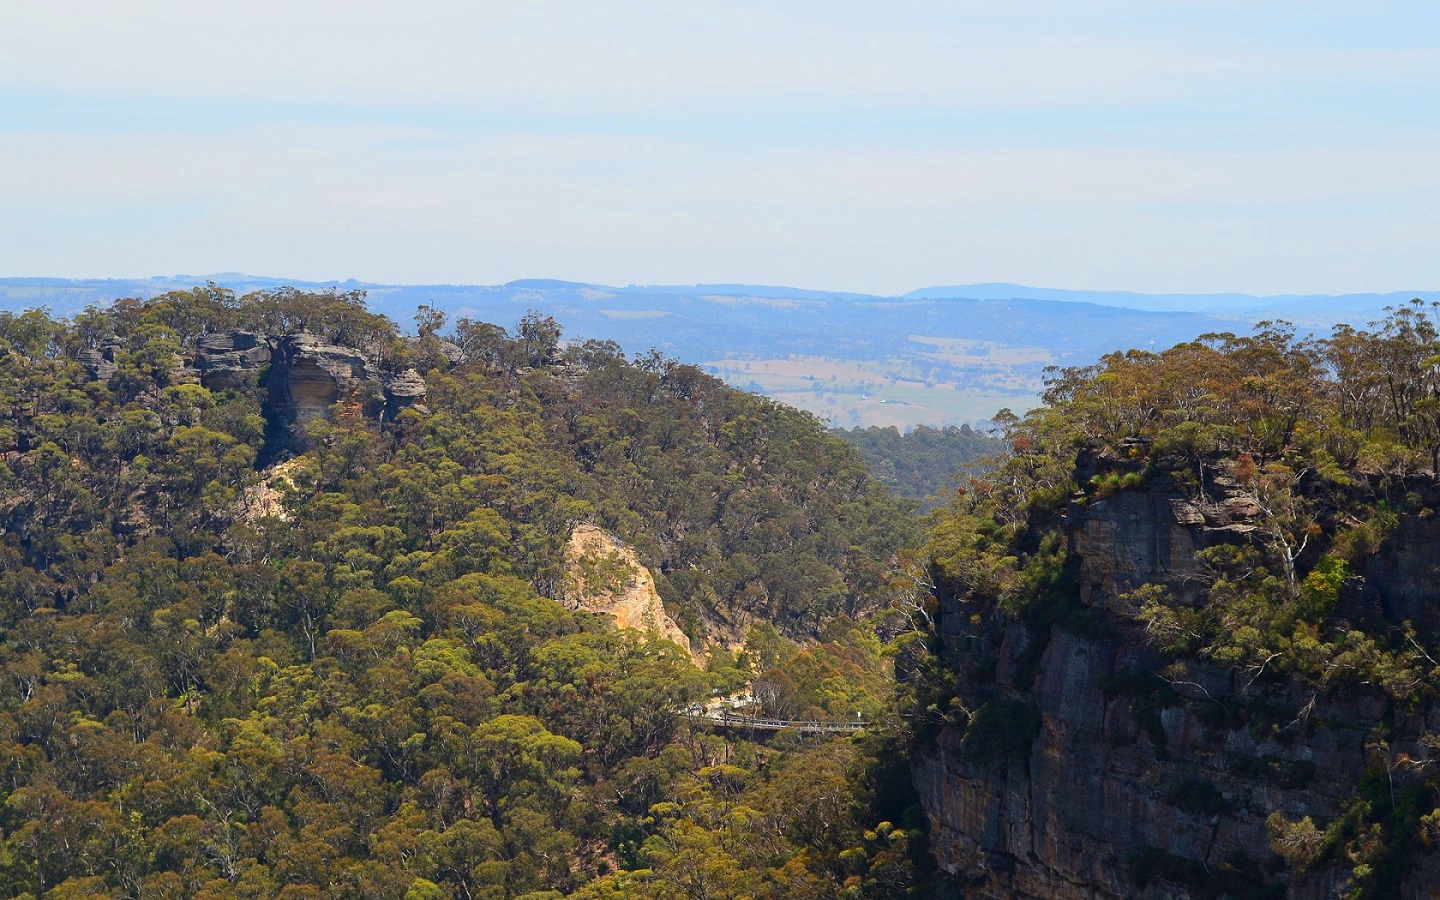 The View From Mount Boyce Lookout, Blue Mountains, NSW Australia by lonewolf6738